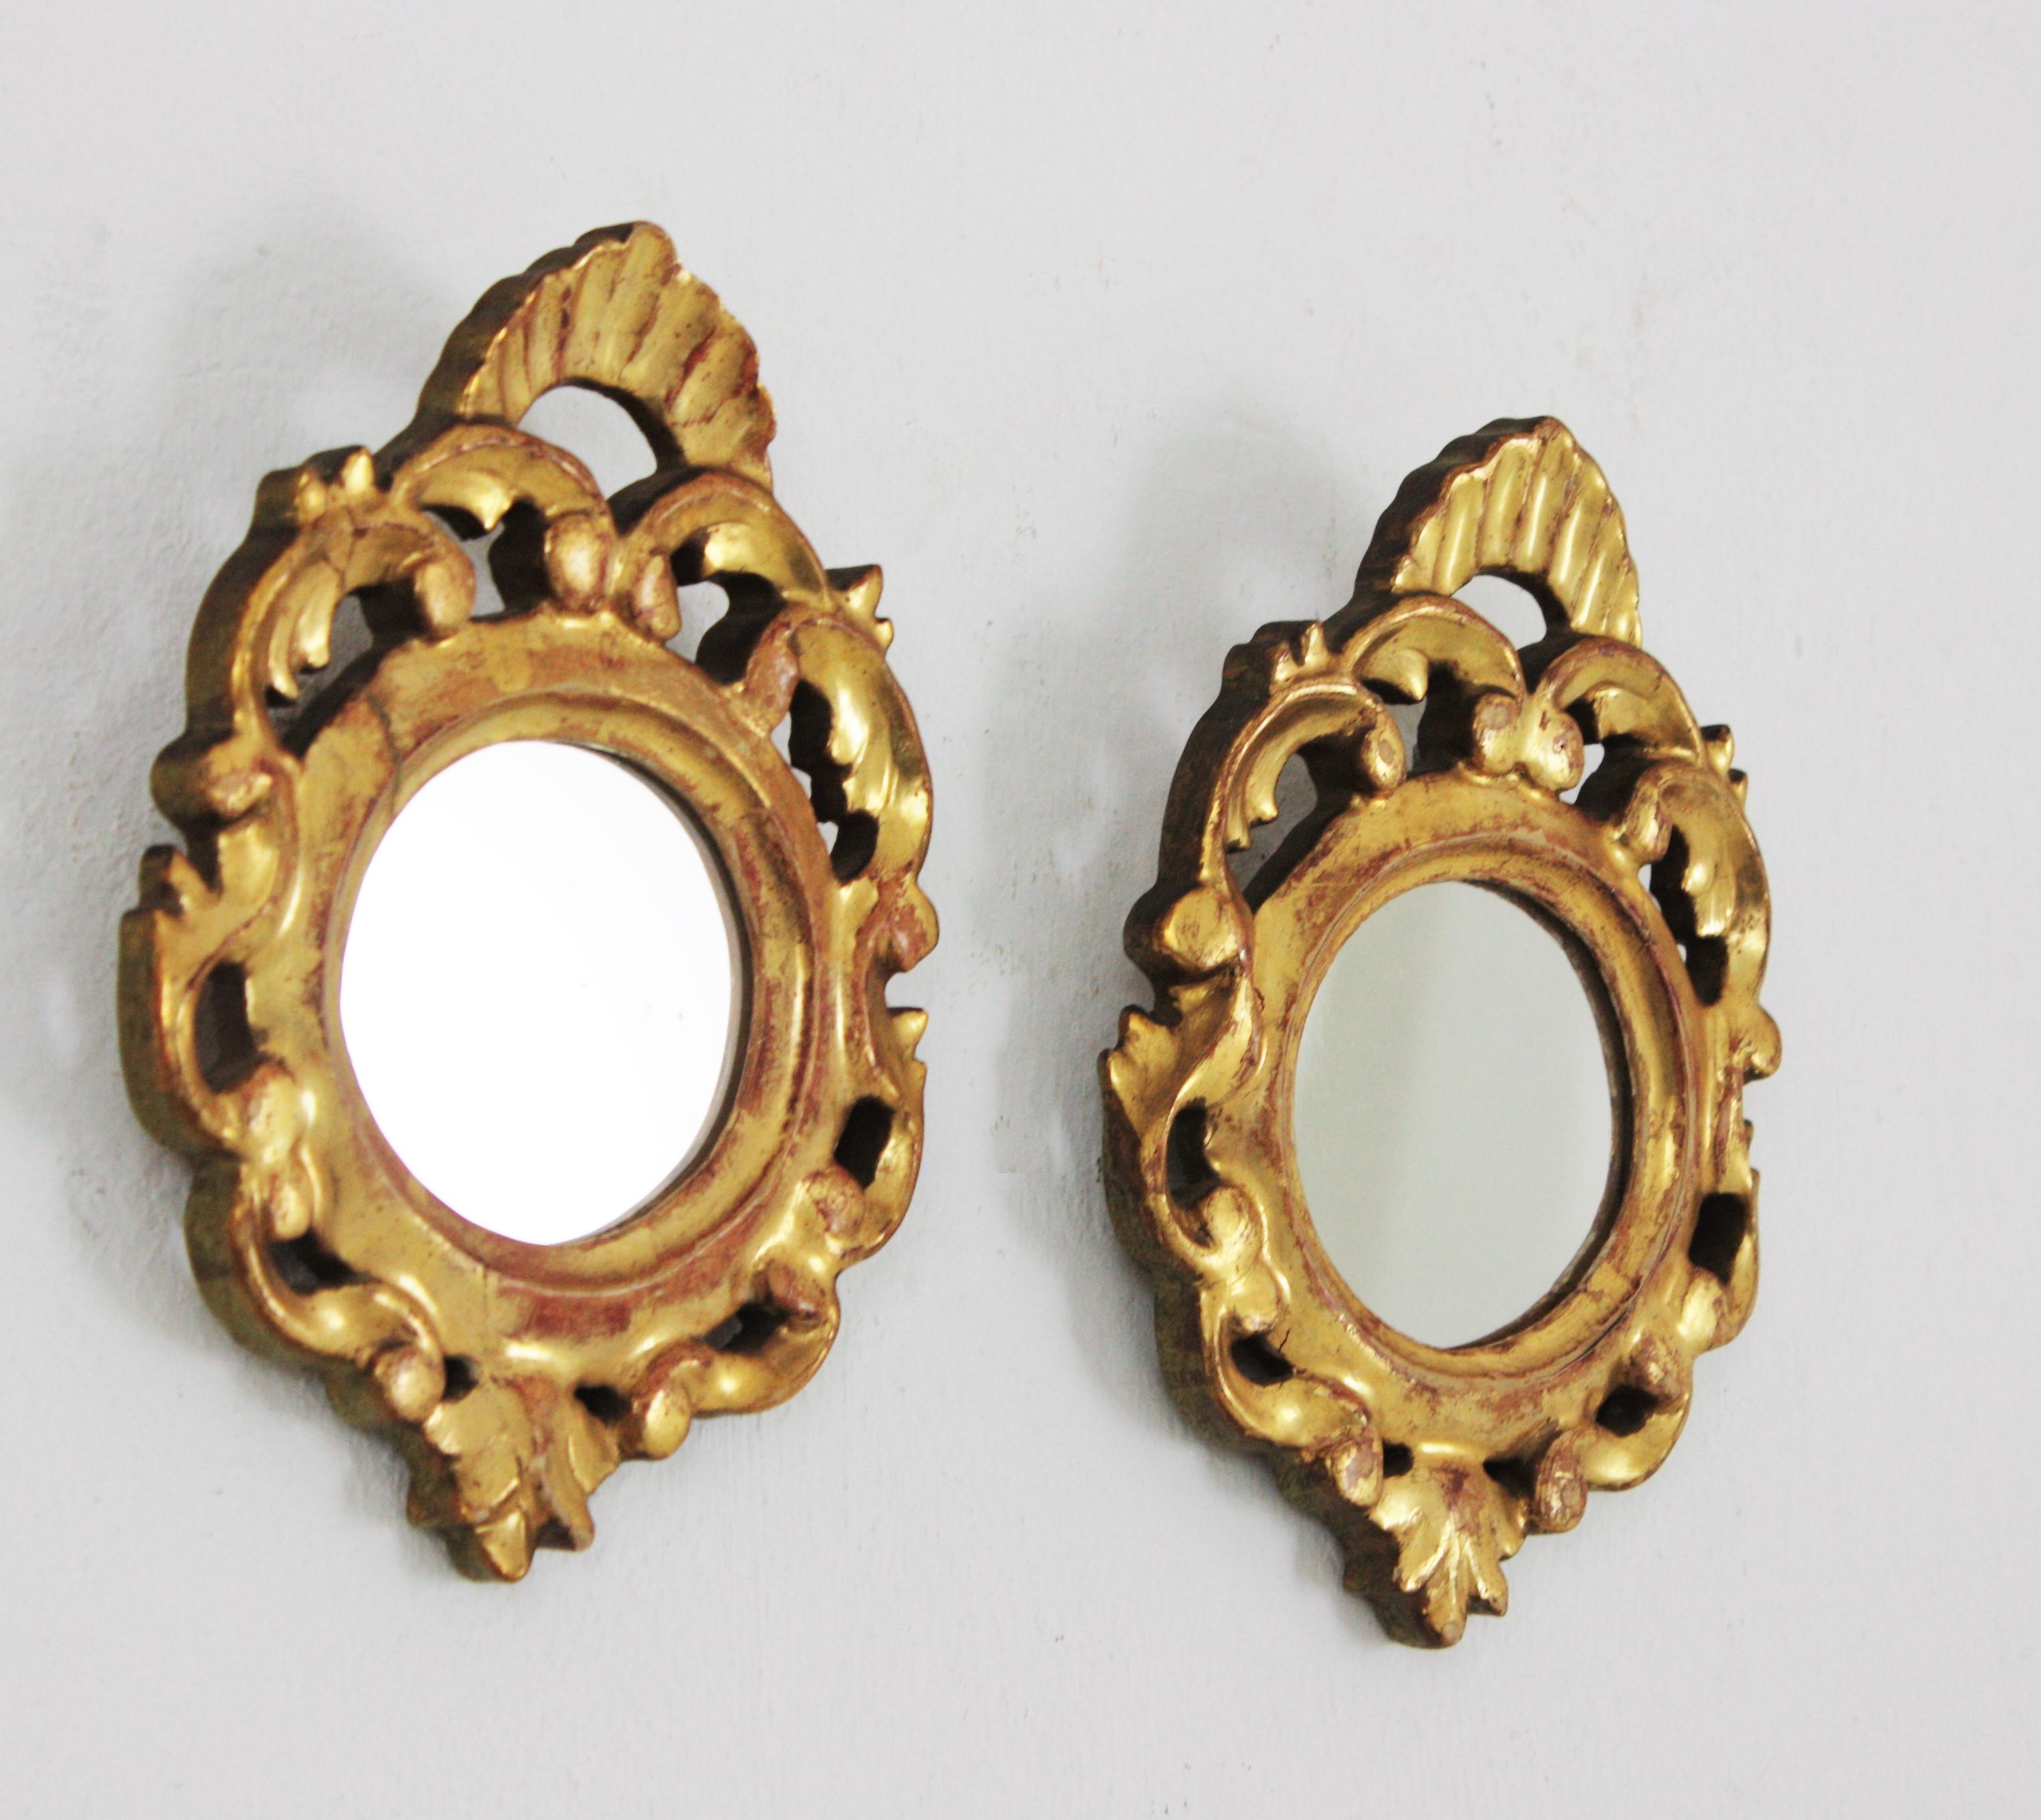 Rococo Style Carved Giltwood Miniature Wall Mirrors, Pair For Sale 2